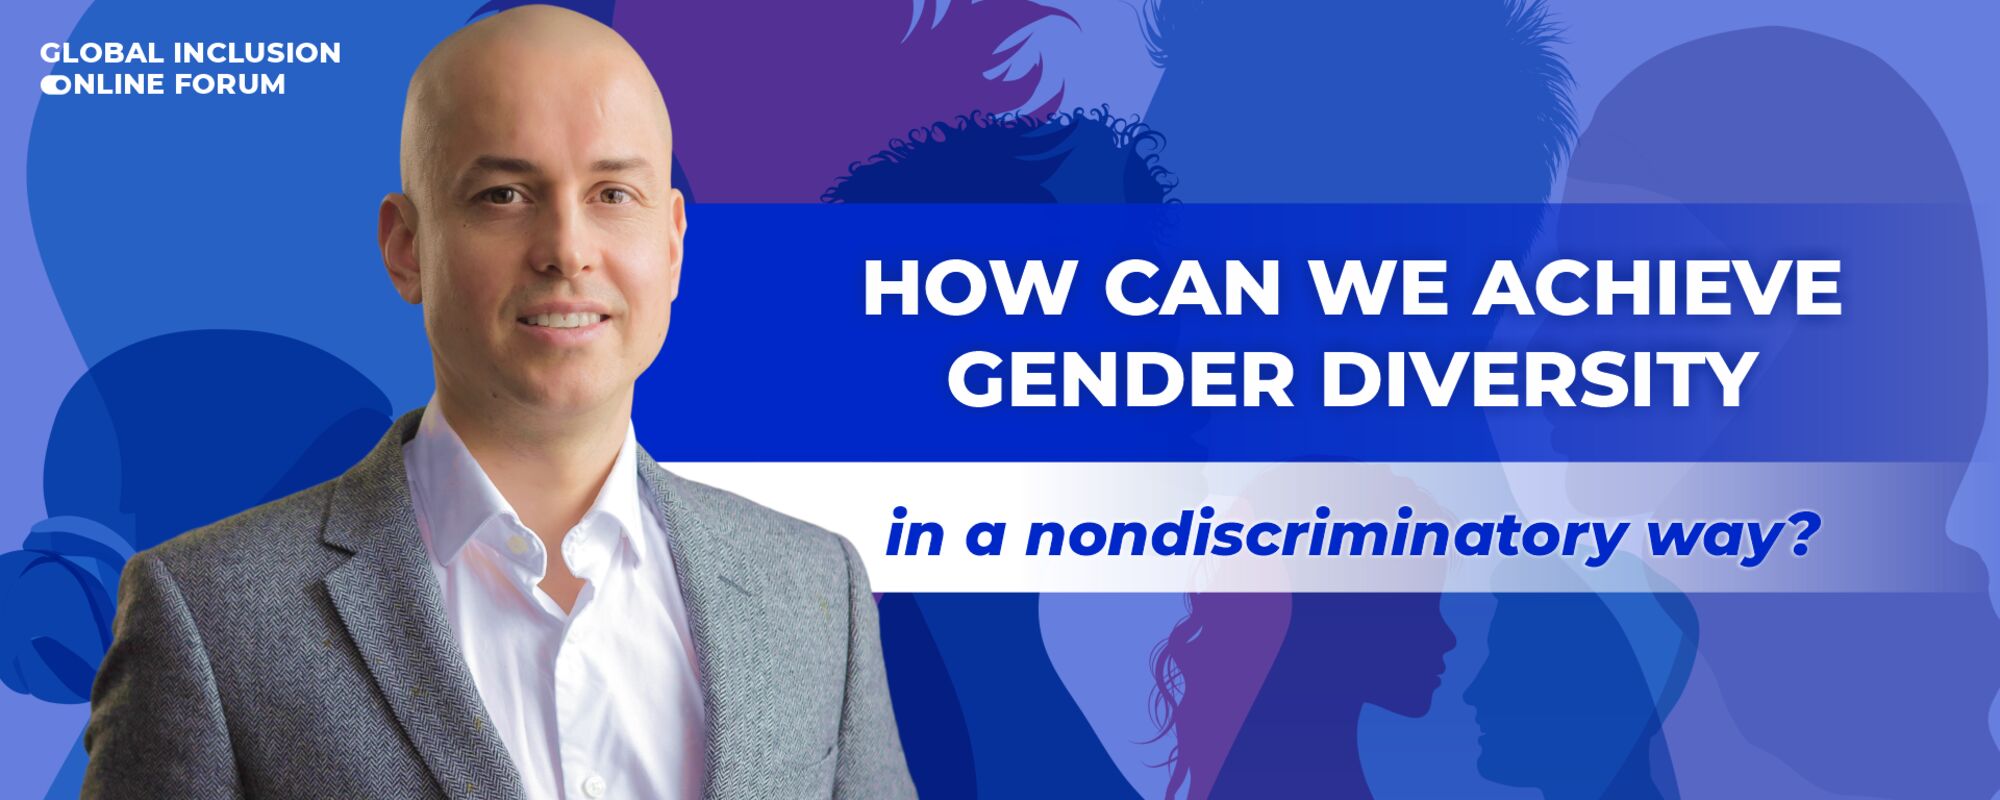 How can we achieve gender diversity in a nondiscriminatory way?